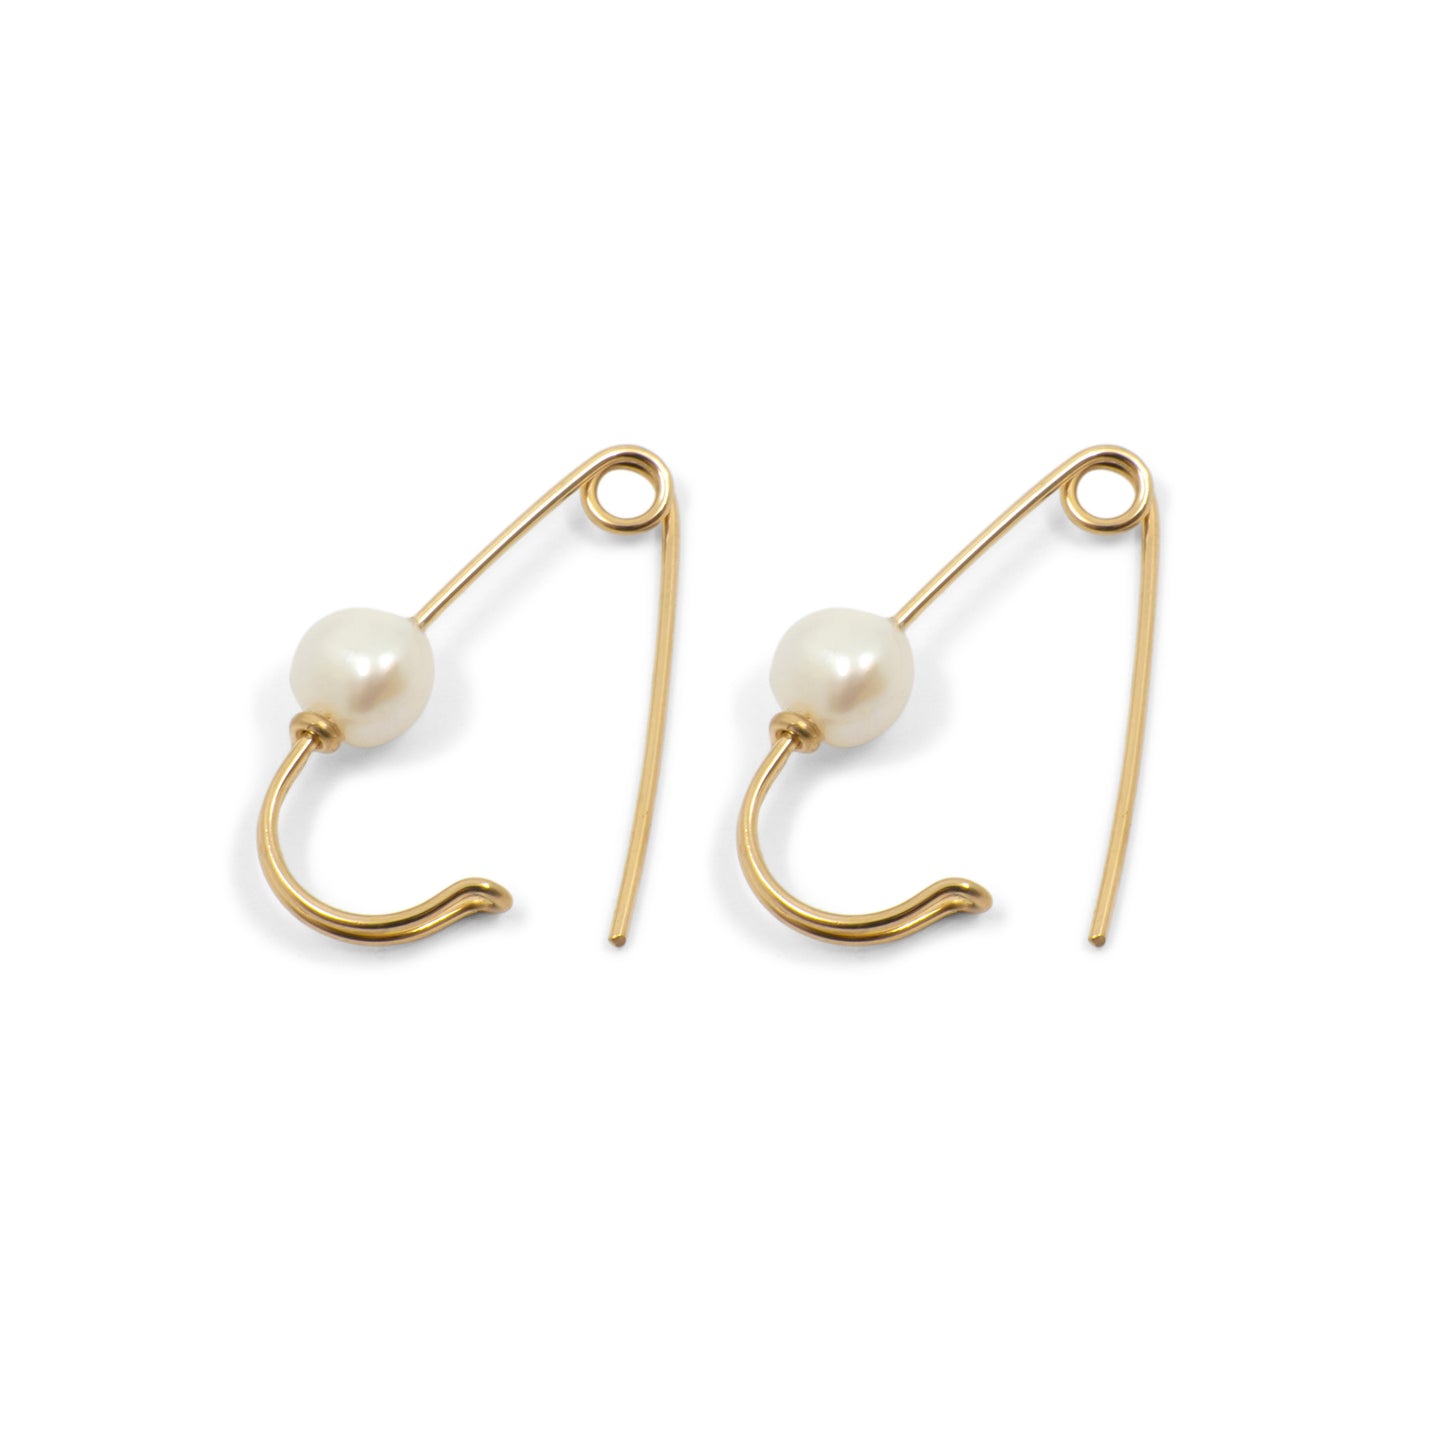 Pearl Wire Safety Pin Earring (Coiled) - Sterling Silver & Gold Filled - Futaba Hayashi